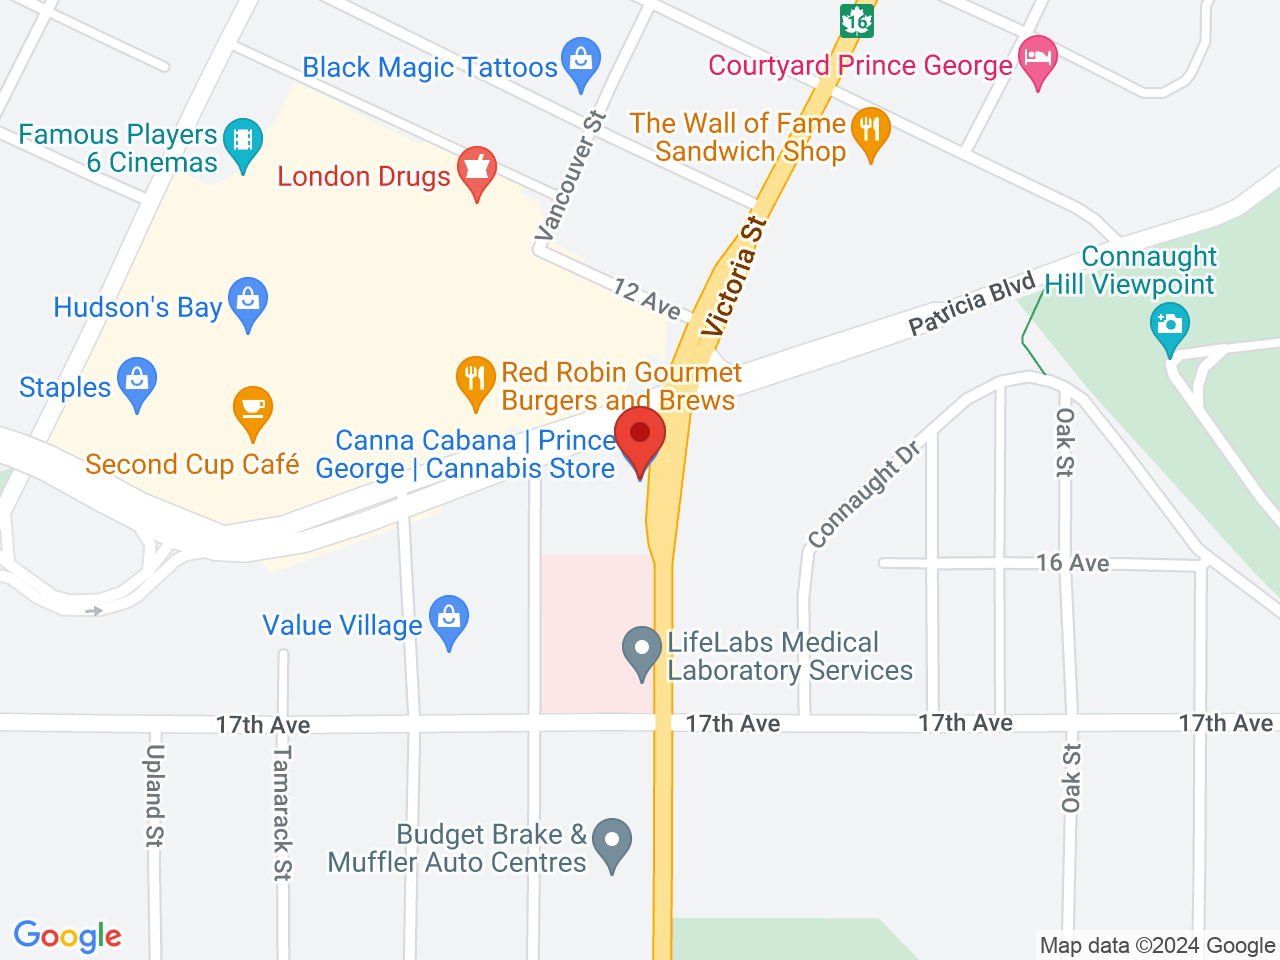 Street map for Canna Cabana, 1543 Victoria St., Prince George BC